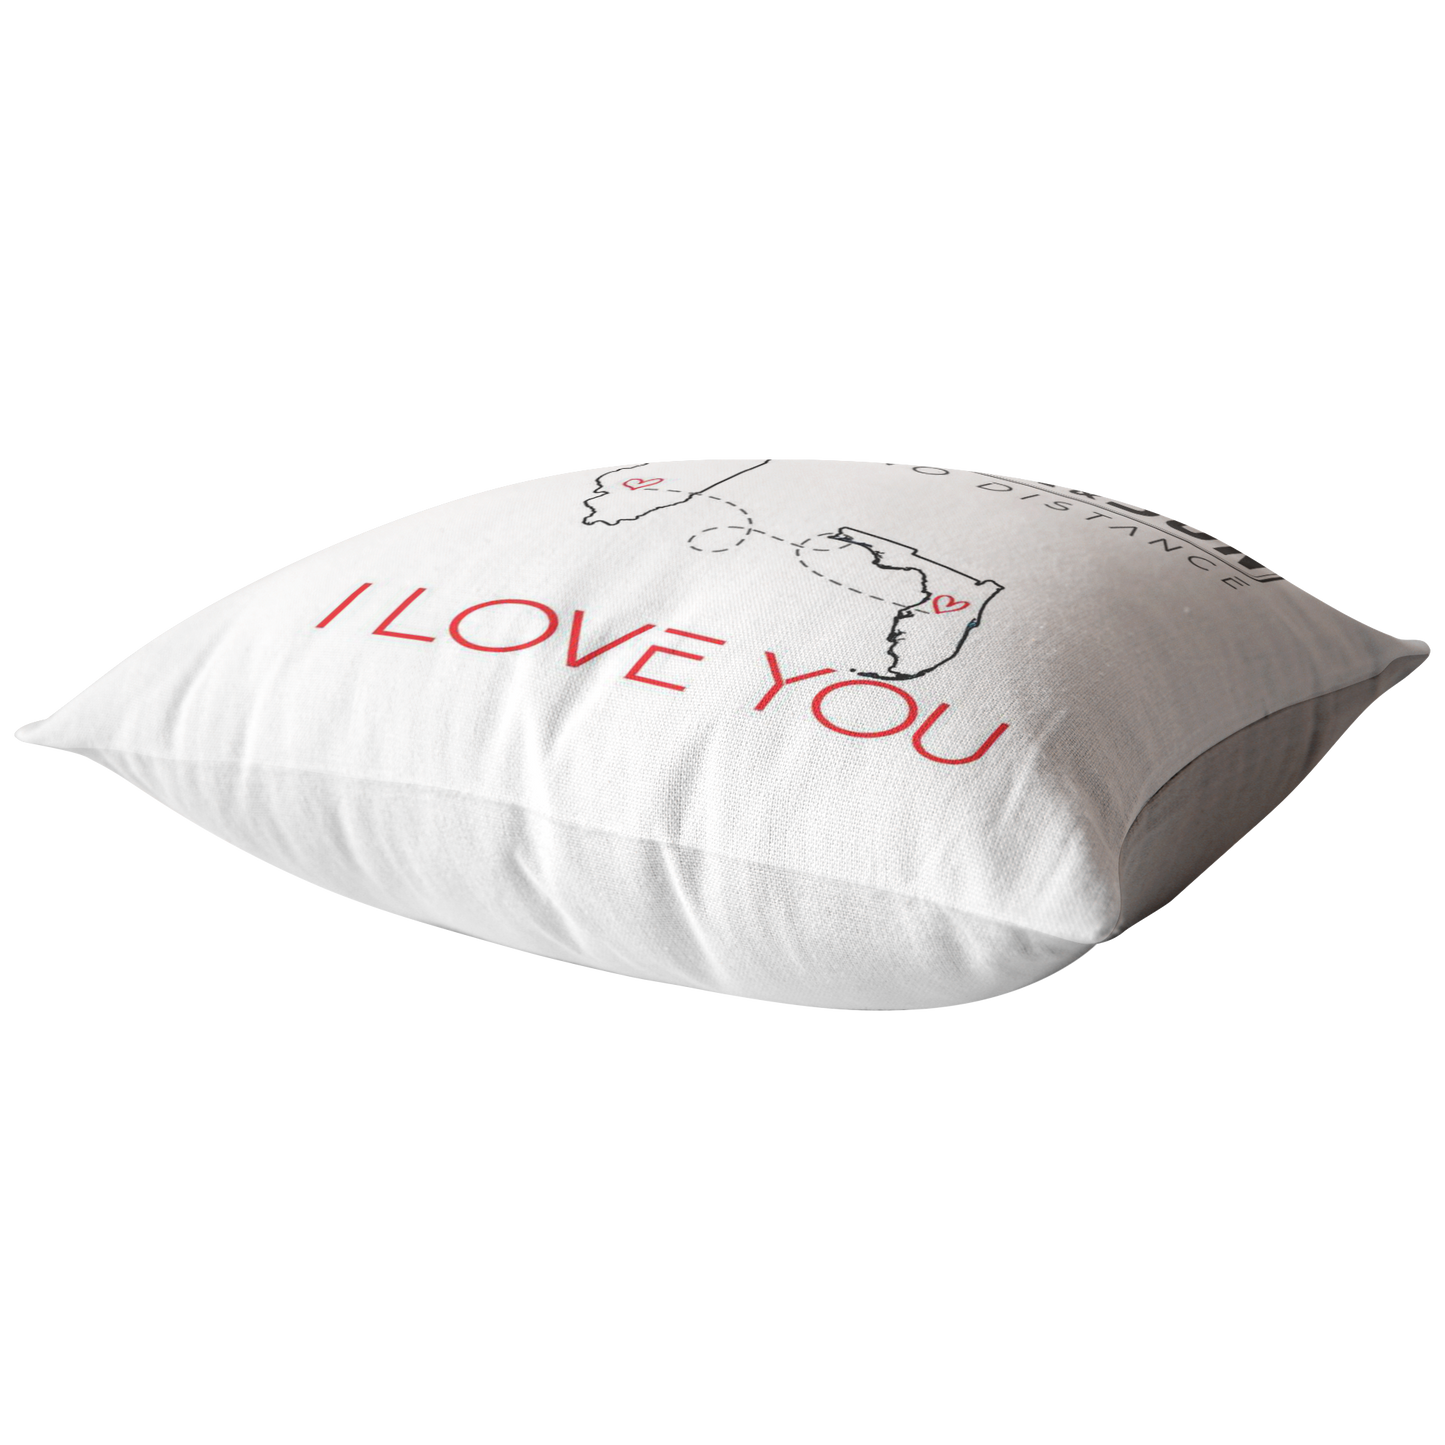 ND-pl20419438-sp-26968 - [ Illinois | Florida | Mother And Son ] (PI_ThrowPillowCovers) Happy Farhers Day, Mothers Day Decoration Personalized - The